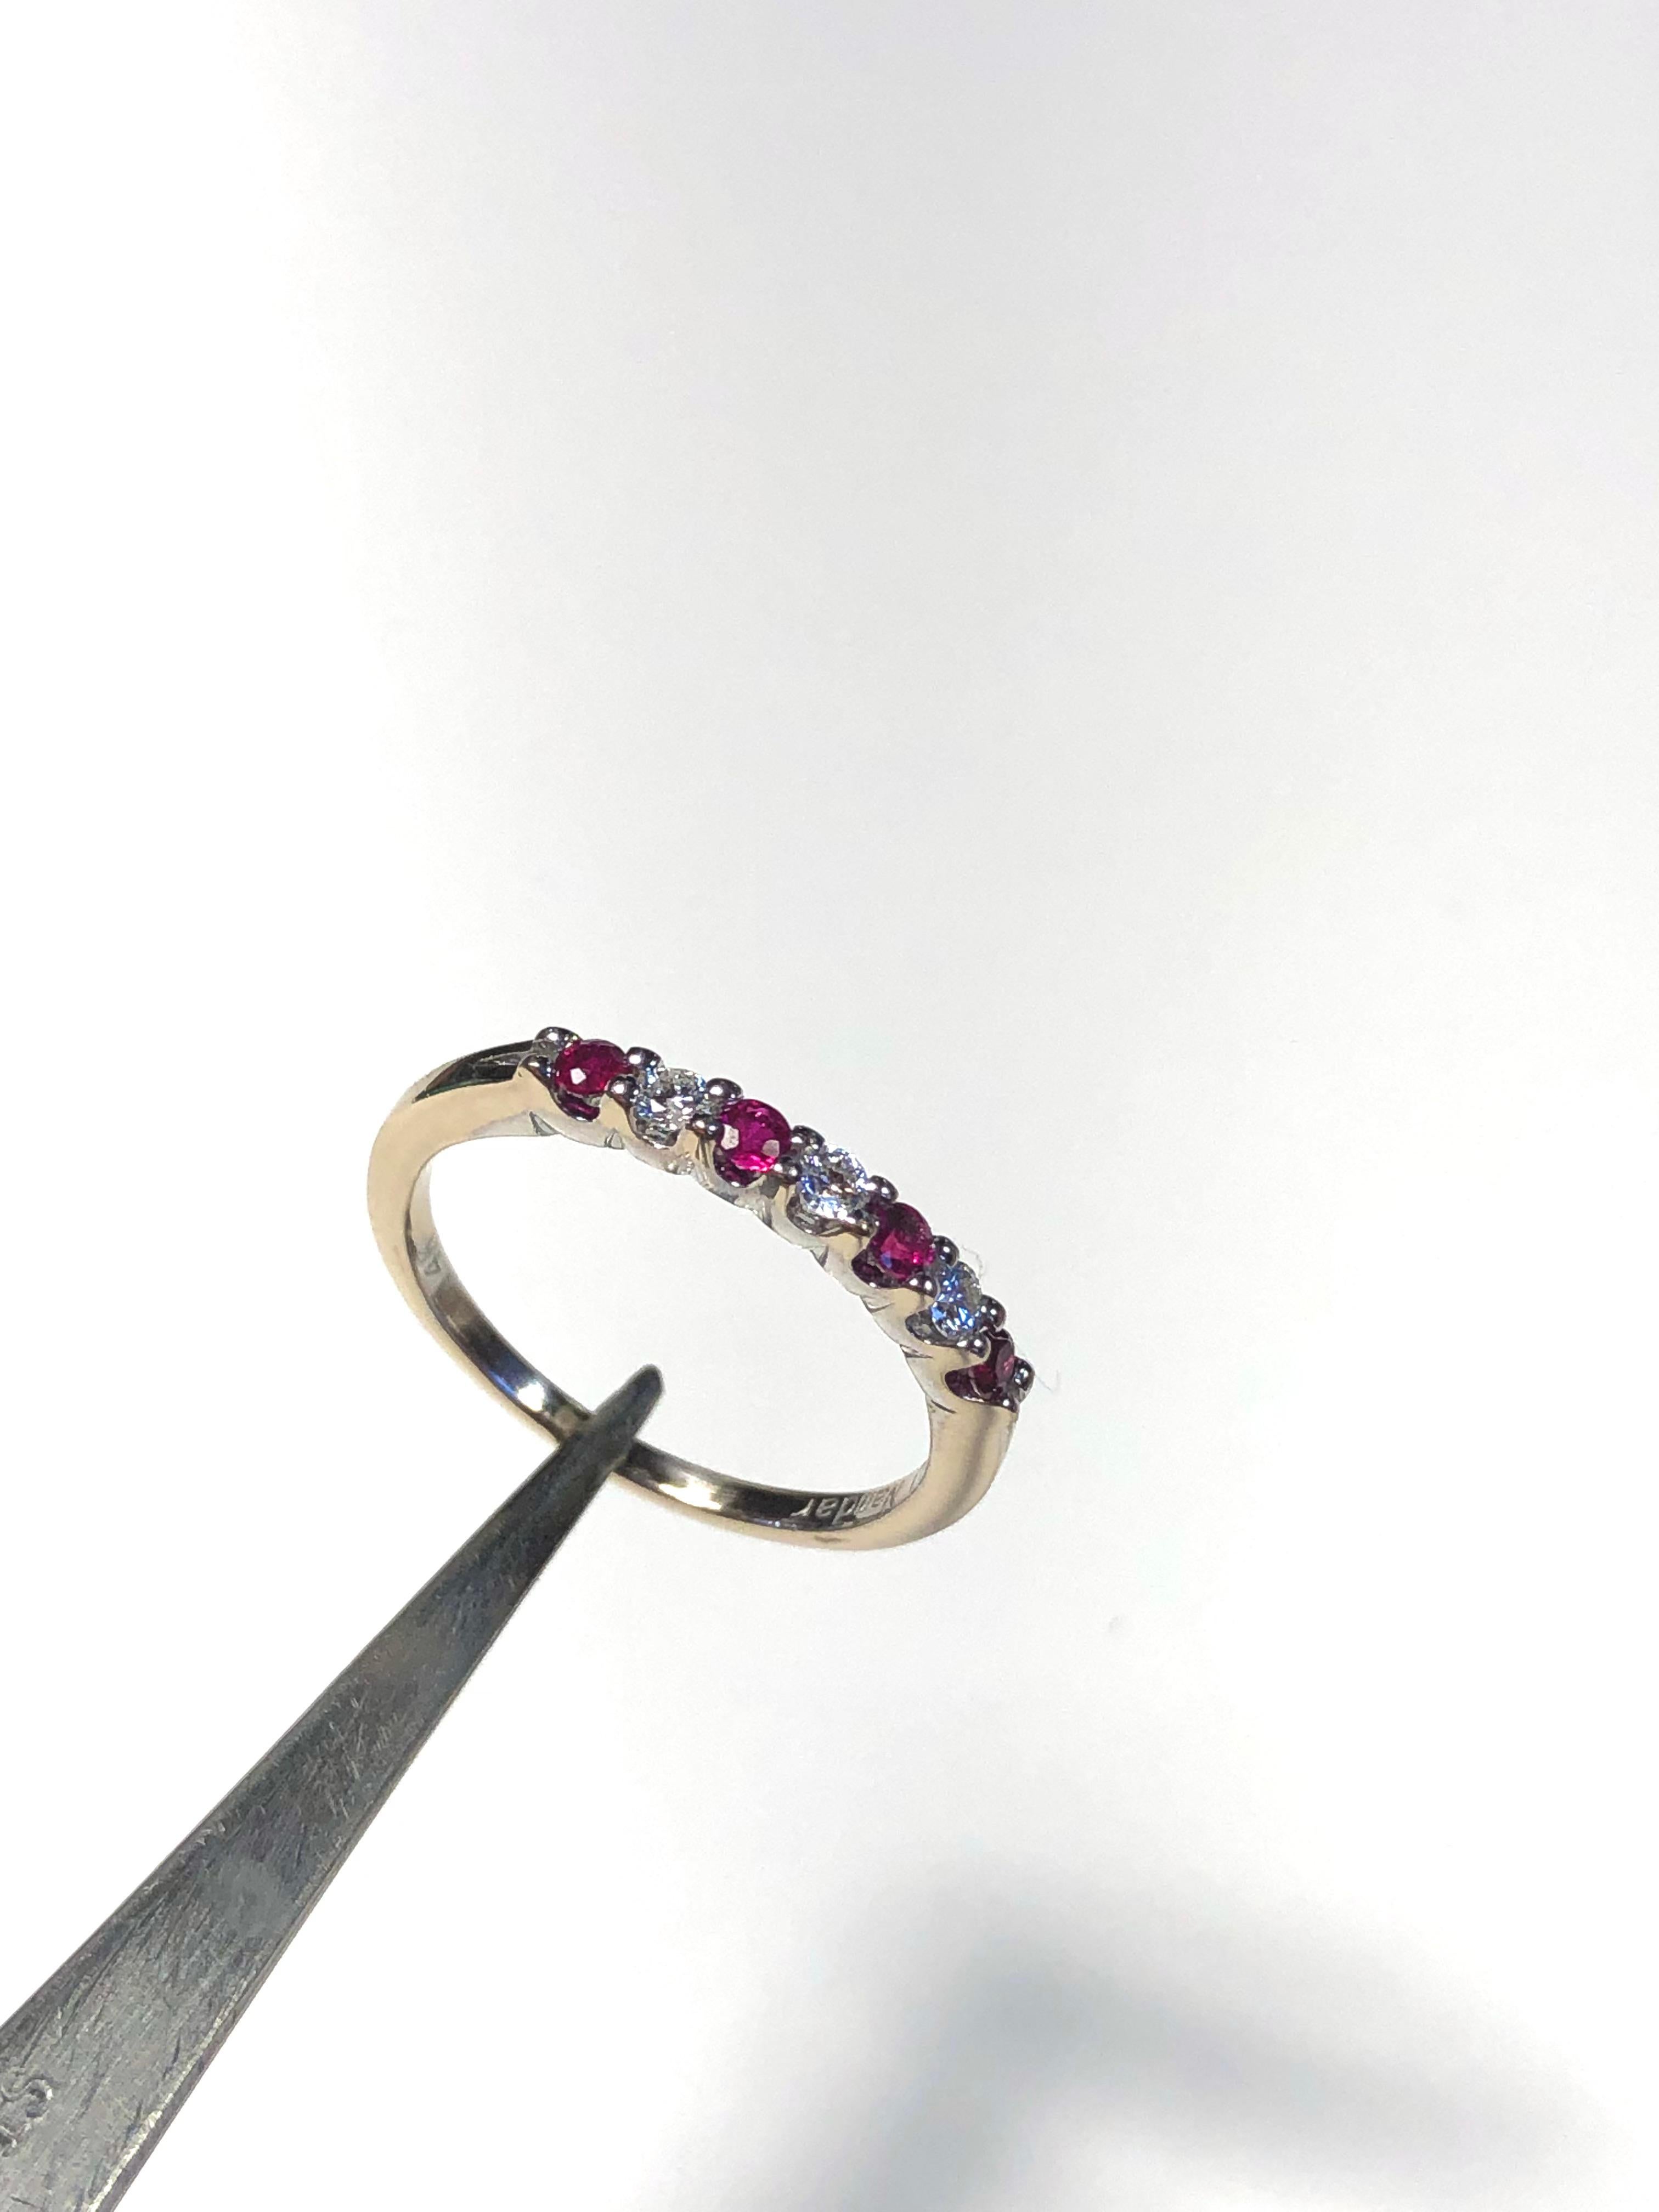 Estate Diamond and Ruby Wedding Band Ring 
Size 6.25 
Metal: 14K white gold 
Weight: 2 grams. The band is 2mm wide
3 Round Diamonds approx. 0.15ctw G-VS
4 Round Rubies approx. 0.24ctw 
This is an estate piece /in excellent condition